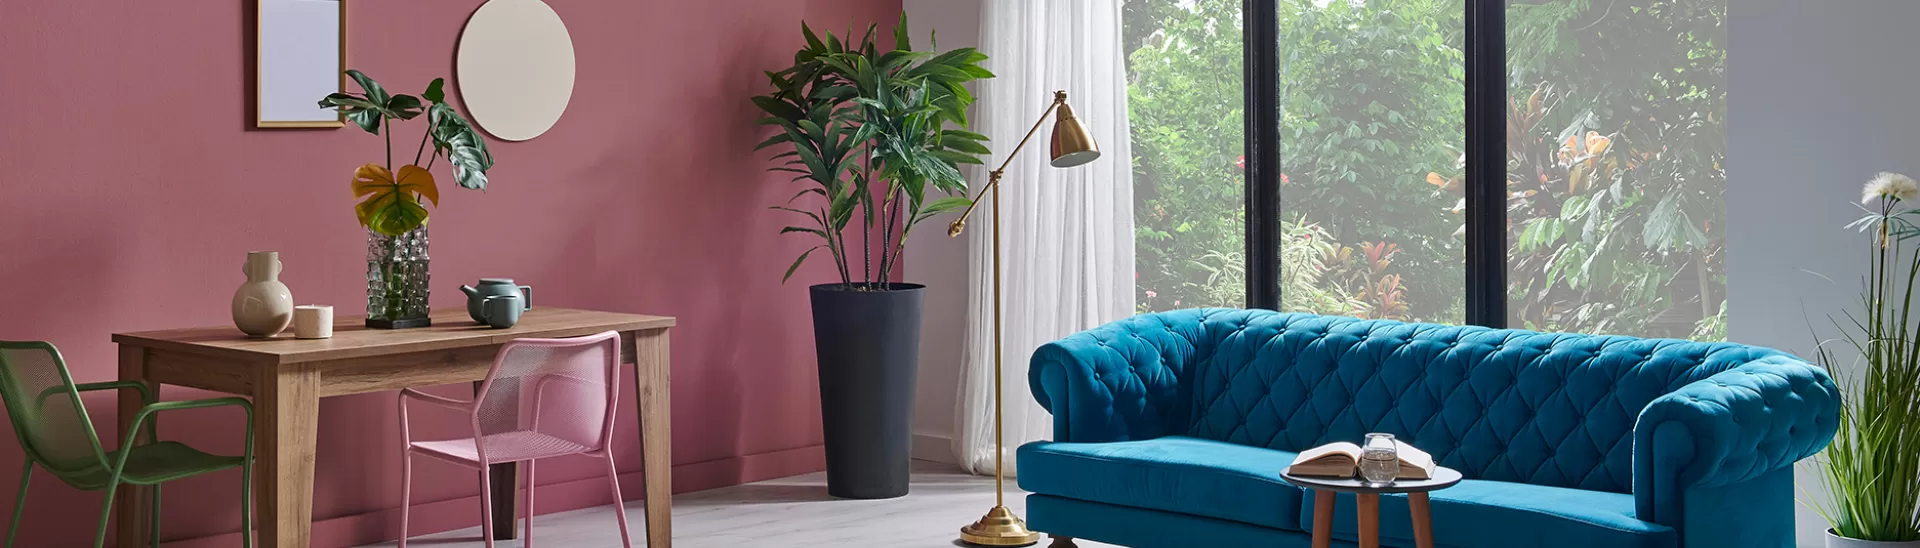 Colour Shades - 6 Home Decorating Techniques to Enhance Your Space